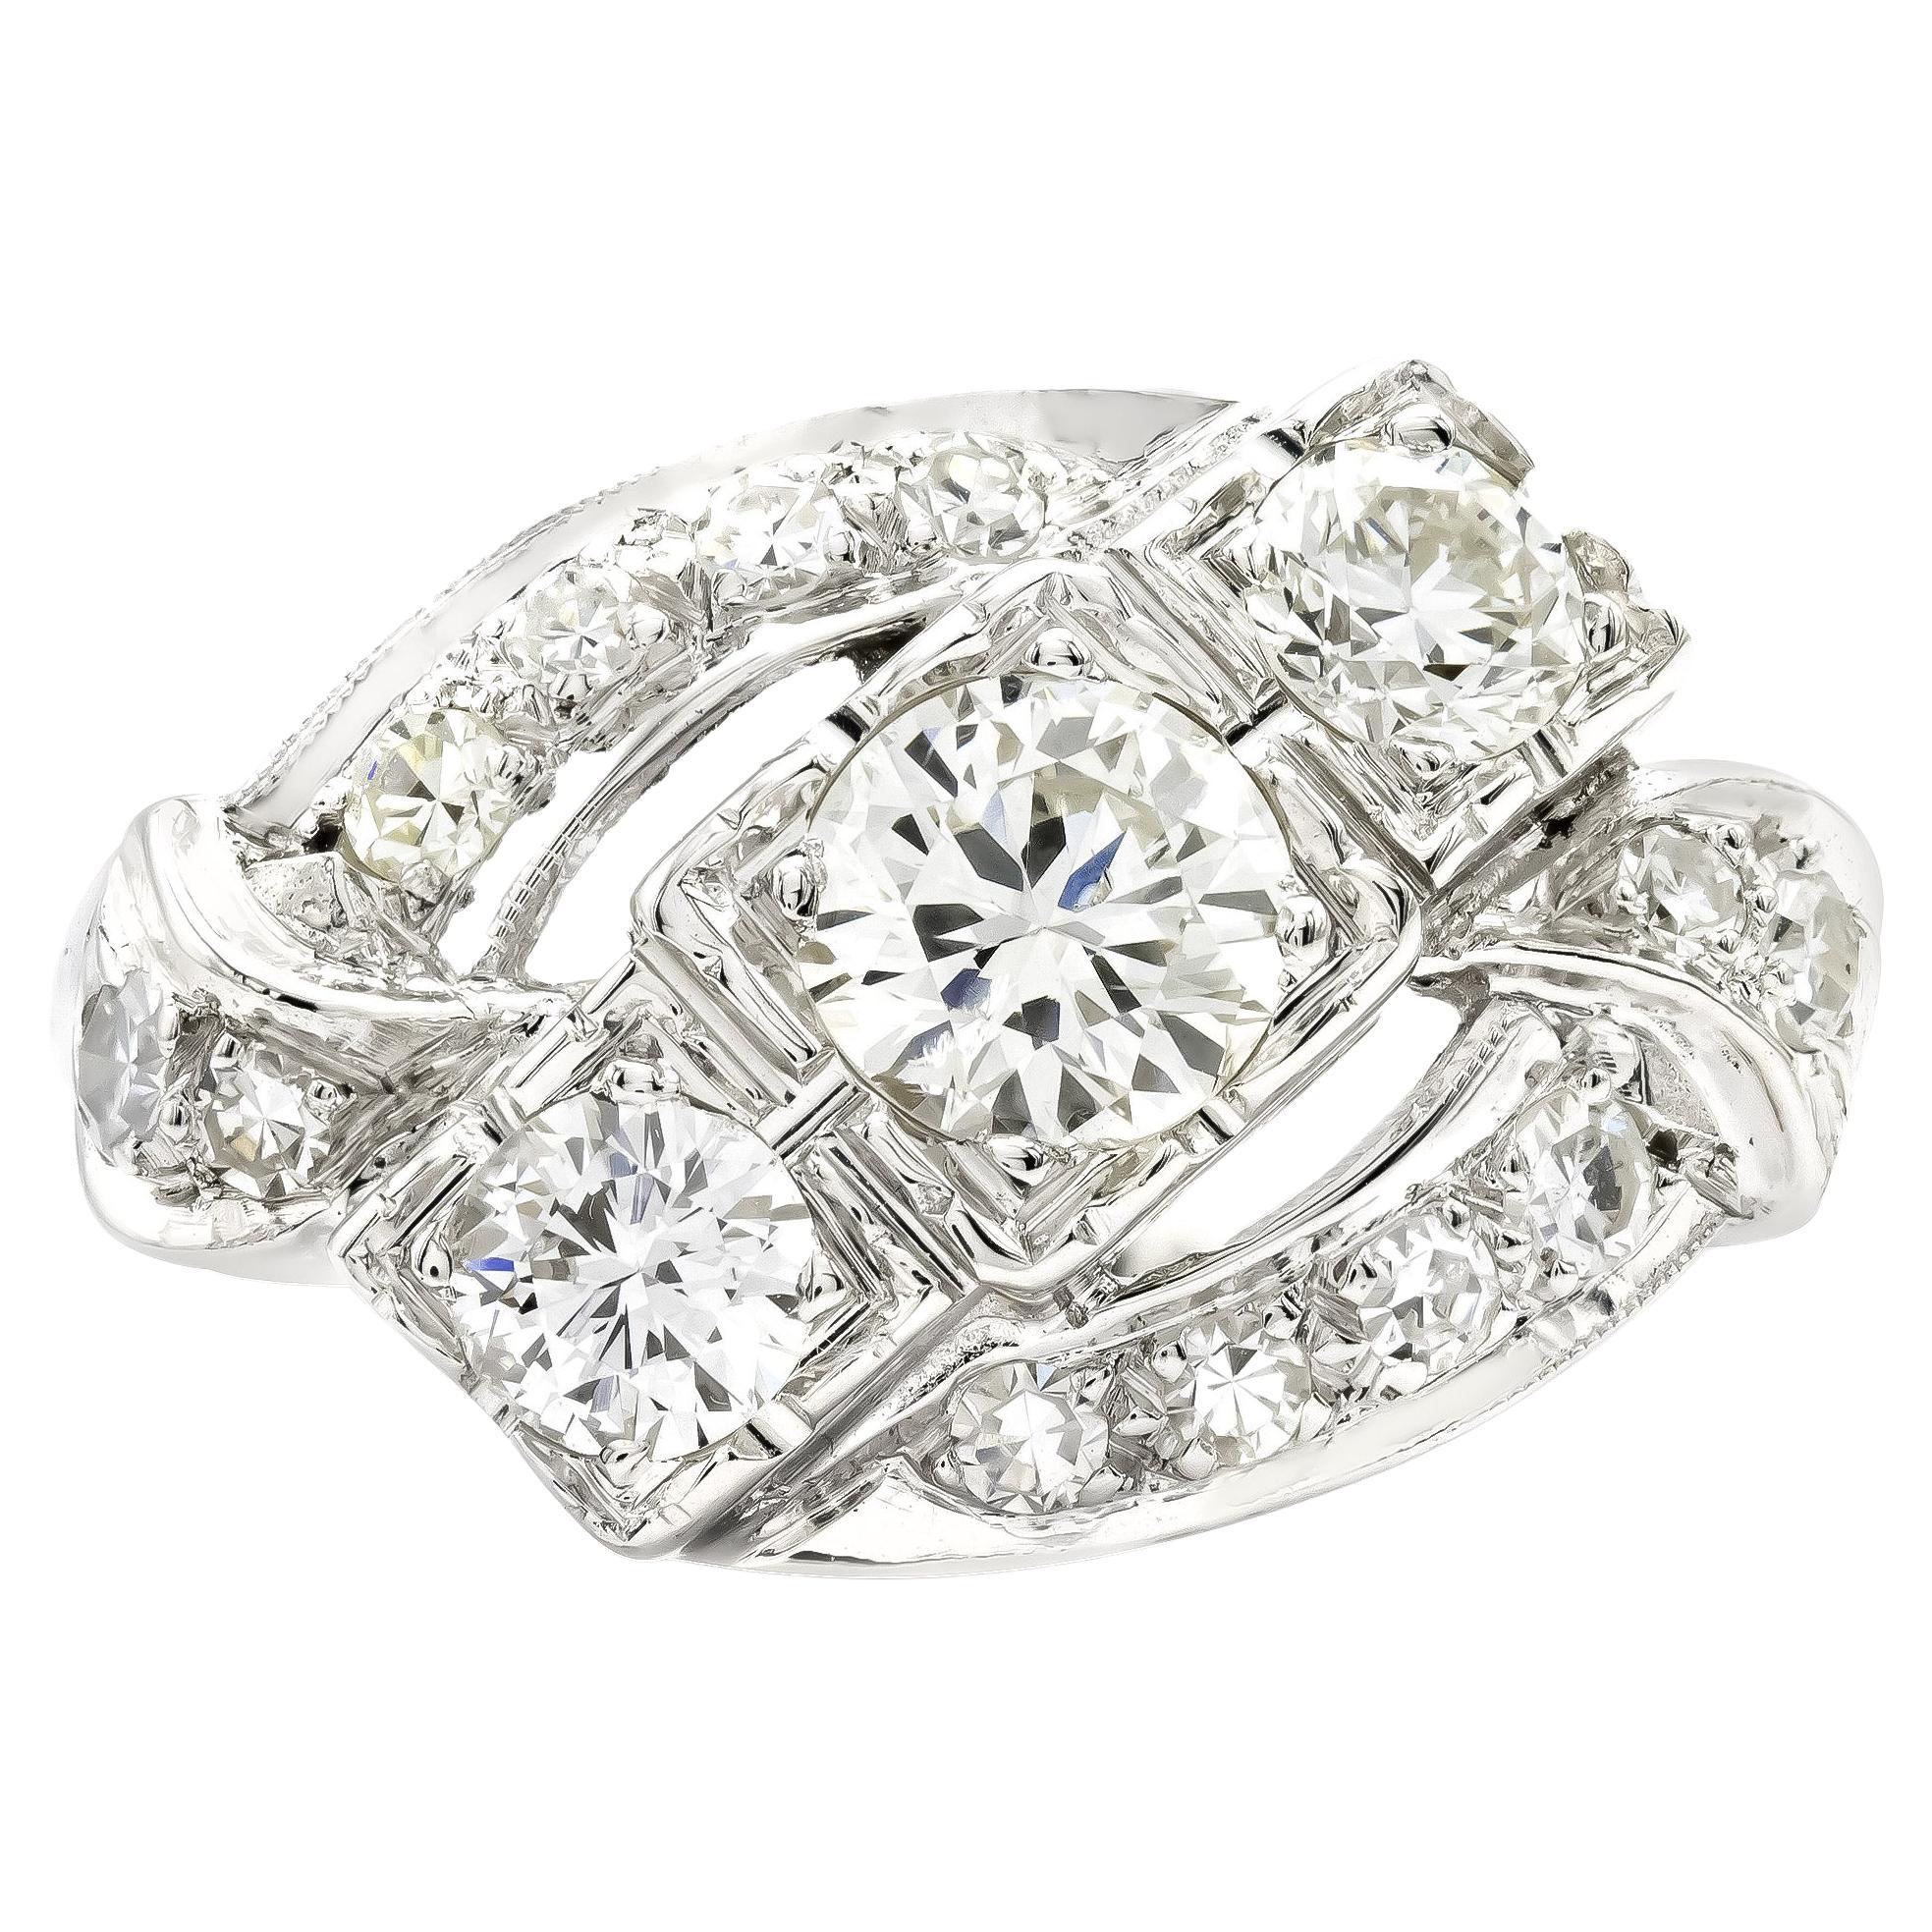 Vintage 1.25 Ct. Three-Stone Diamond Ring H-I SI in 14kt White Gold